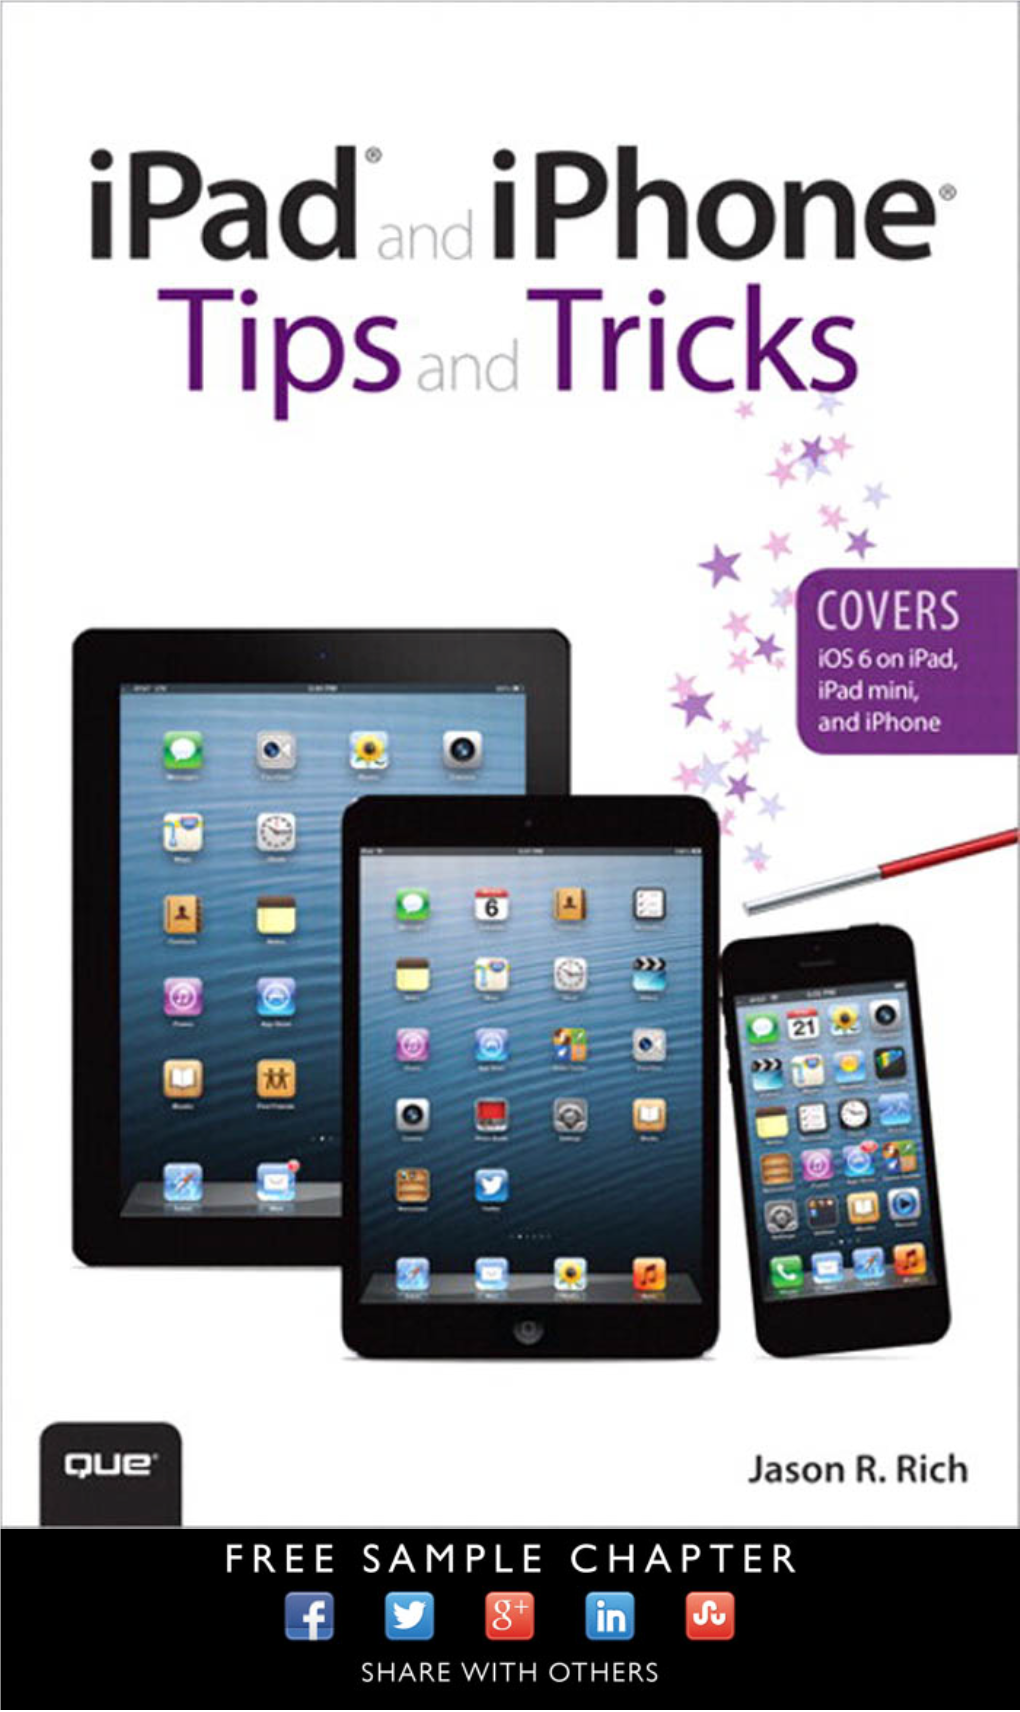 Ipad® and Iphone® TIPS and TRICKS EDITOR-IN-CHIEF Greg Wiegand SECOND EDITION ACQUISITIONS EDITOR COPYRIGHT © 2013 by PEARSON EDUCATION, INC